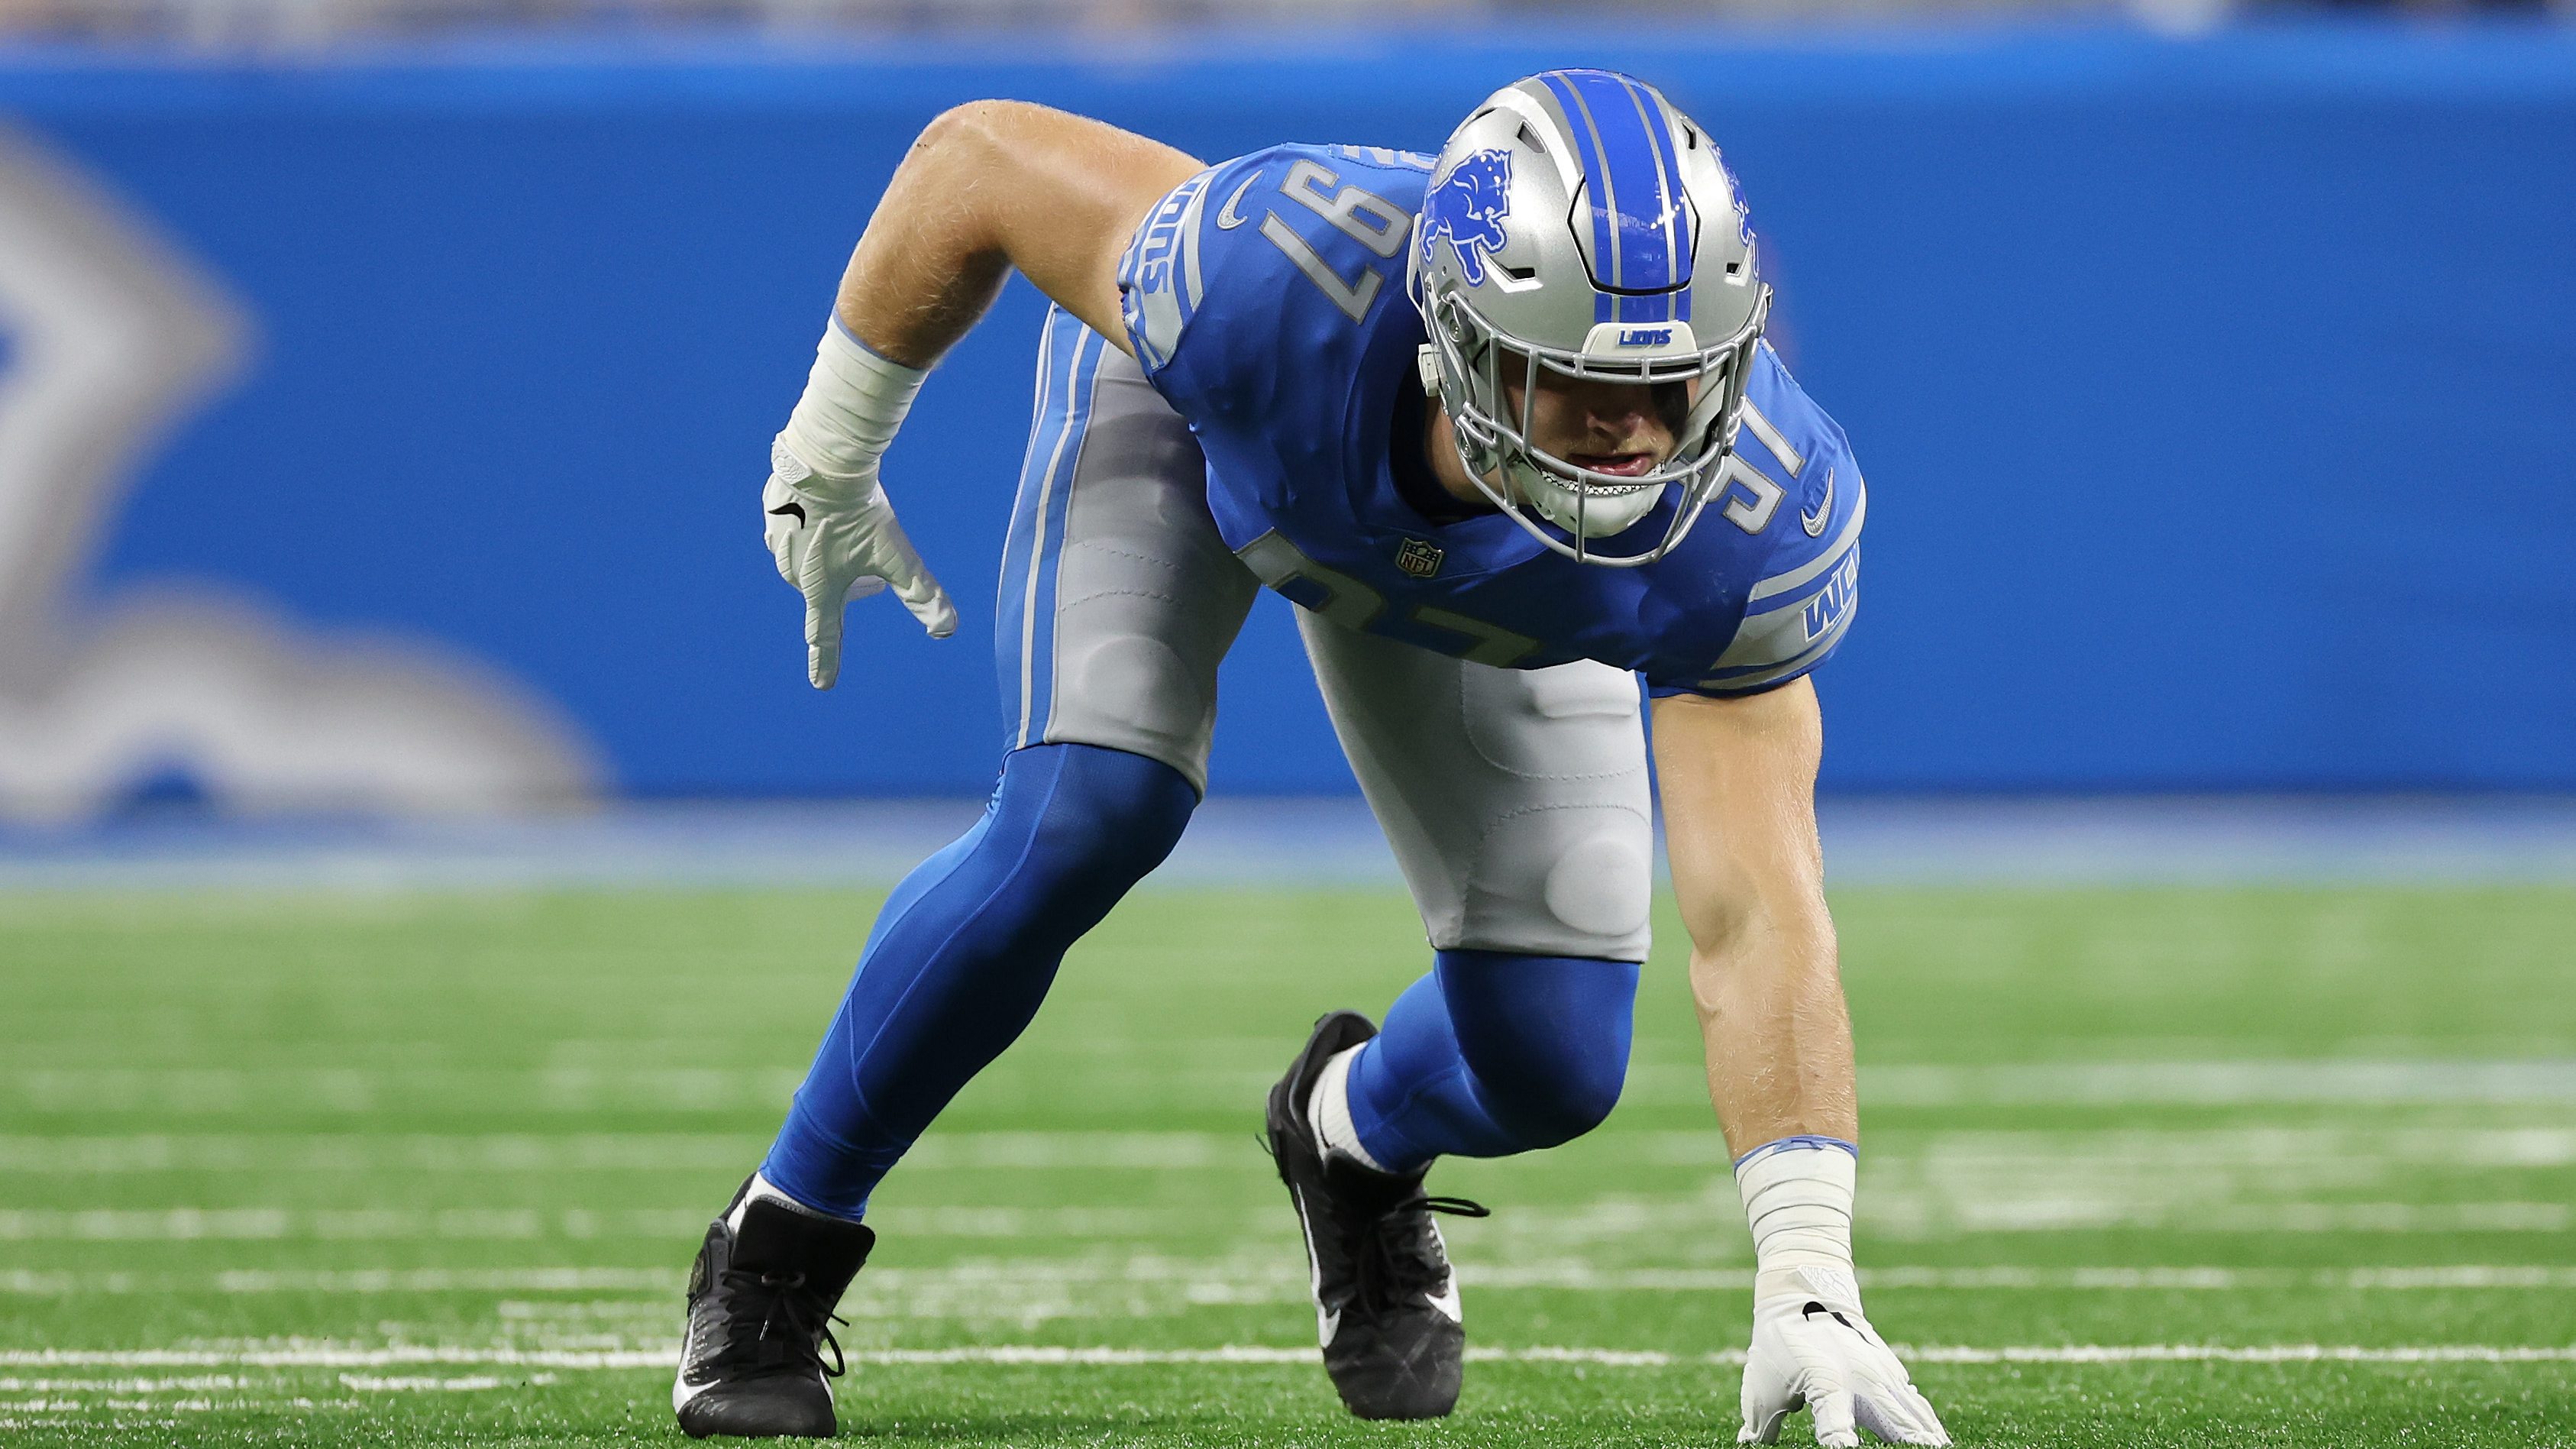 Top Lions draft pick Aidan Hutchinson misses practice with leg injury   mlivecom